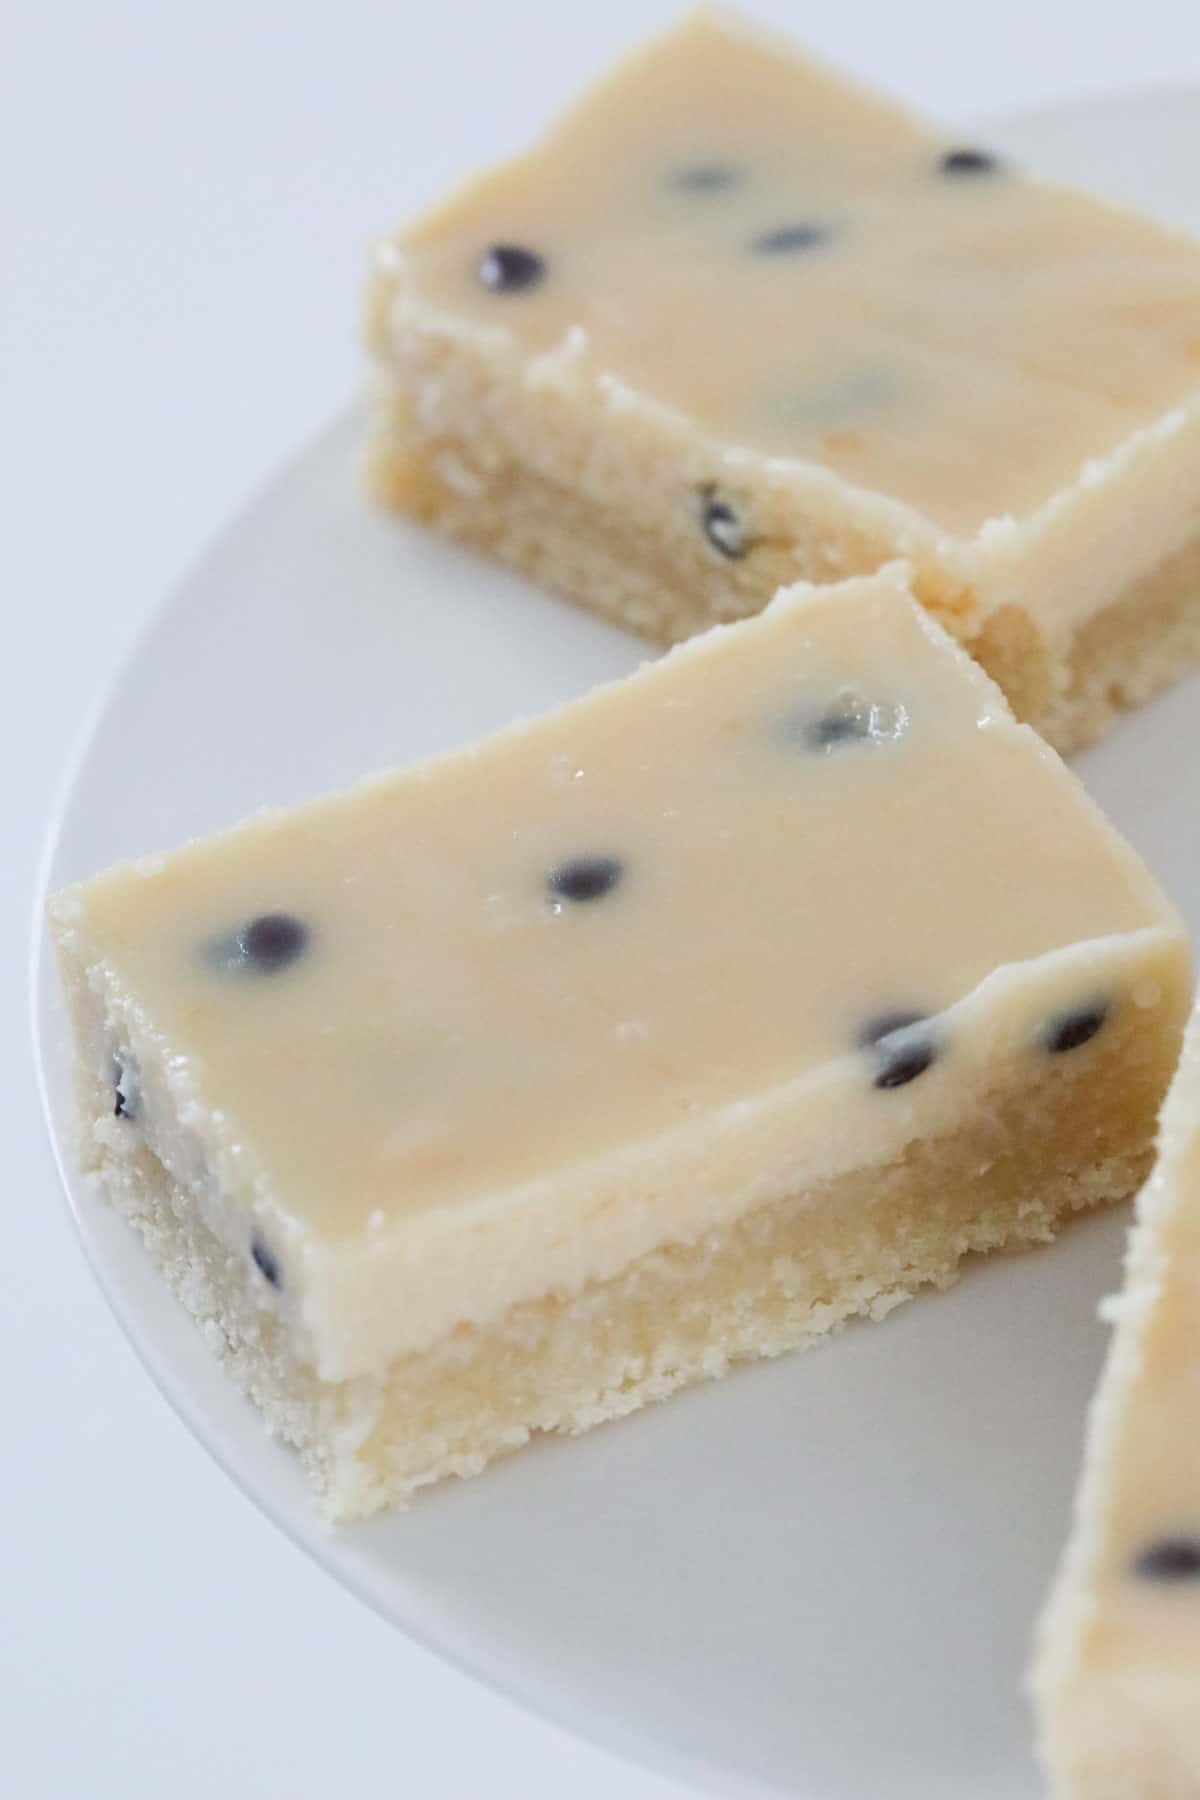 Passionfruit pulp in a creamy slice.